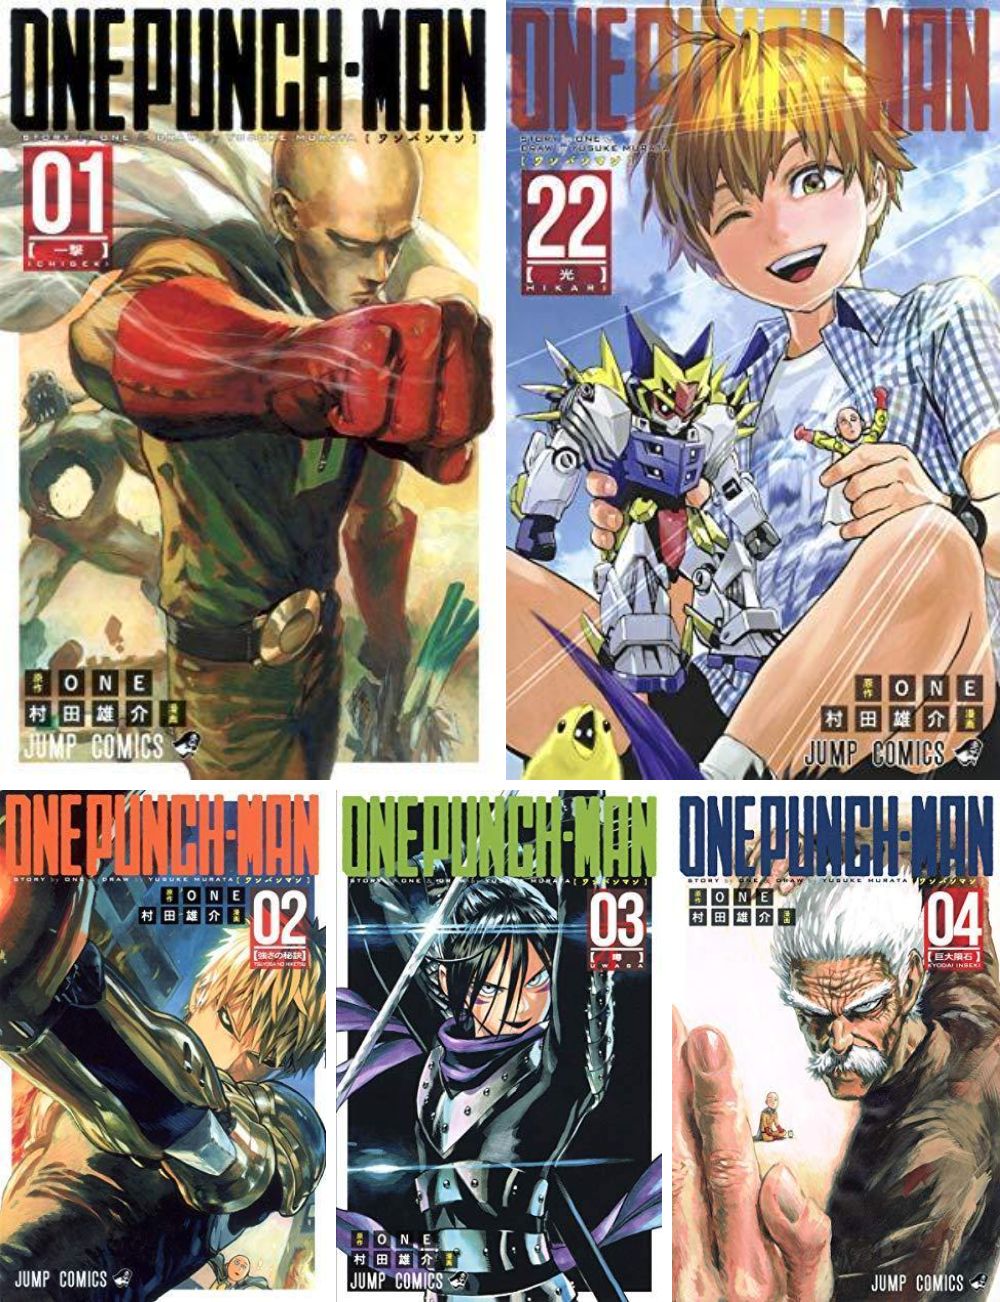 One Punch Man Vol. 1-22 Set – Japanese Book Store